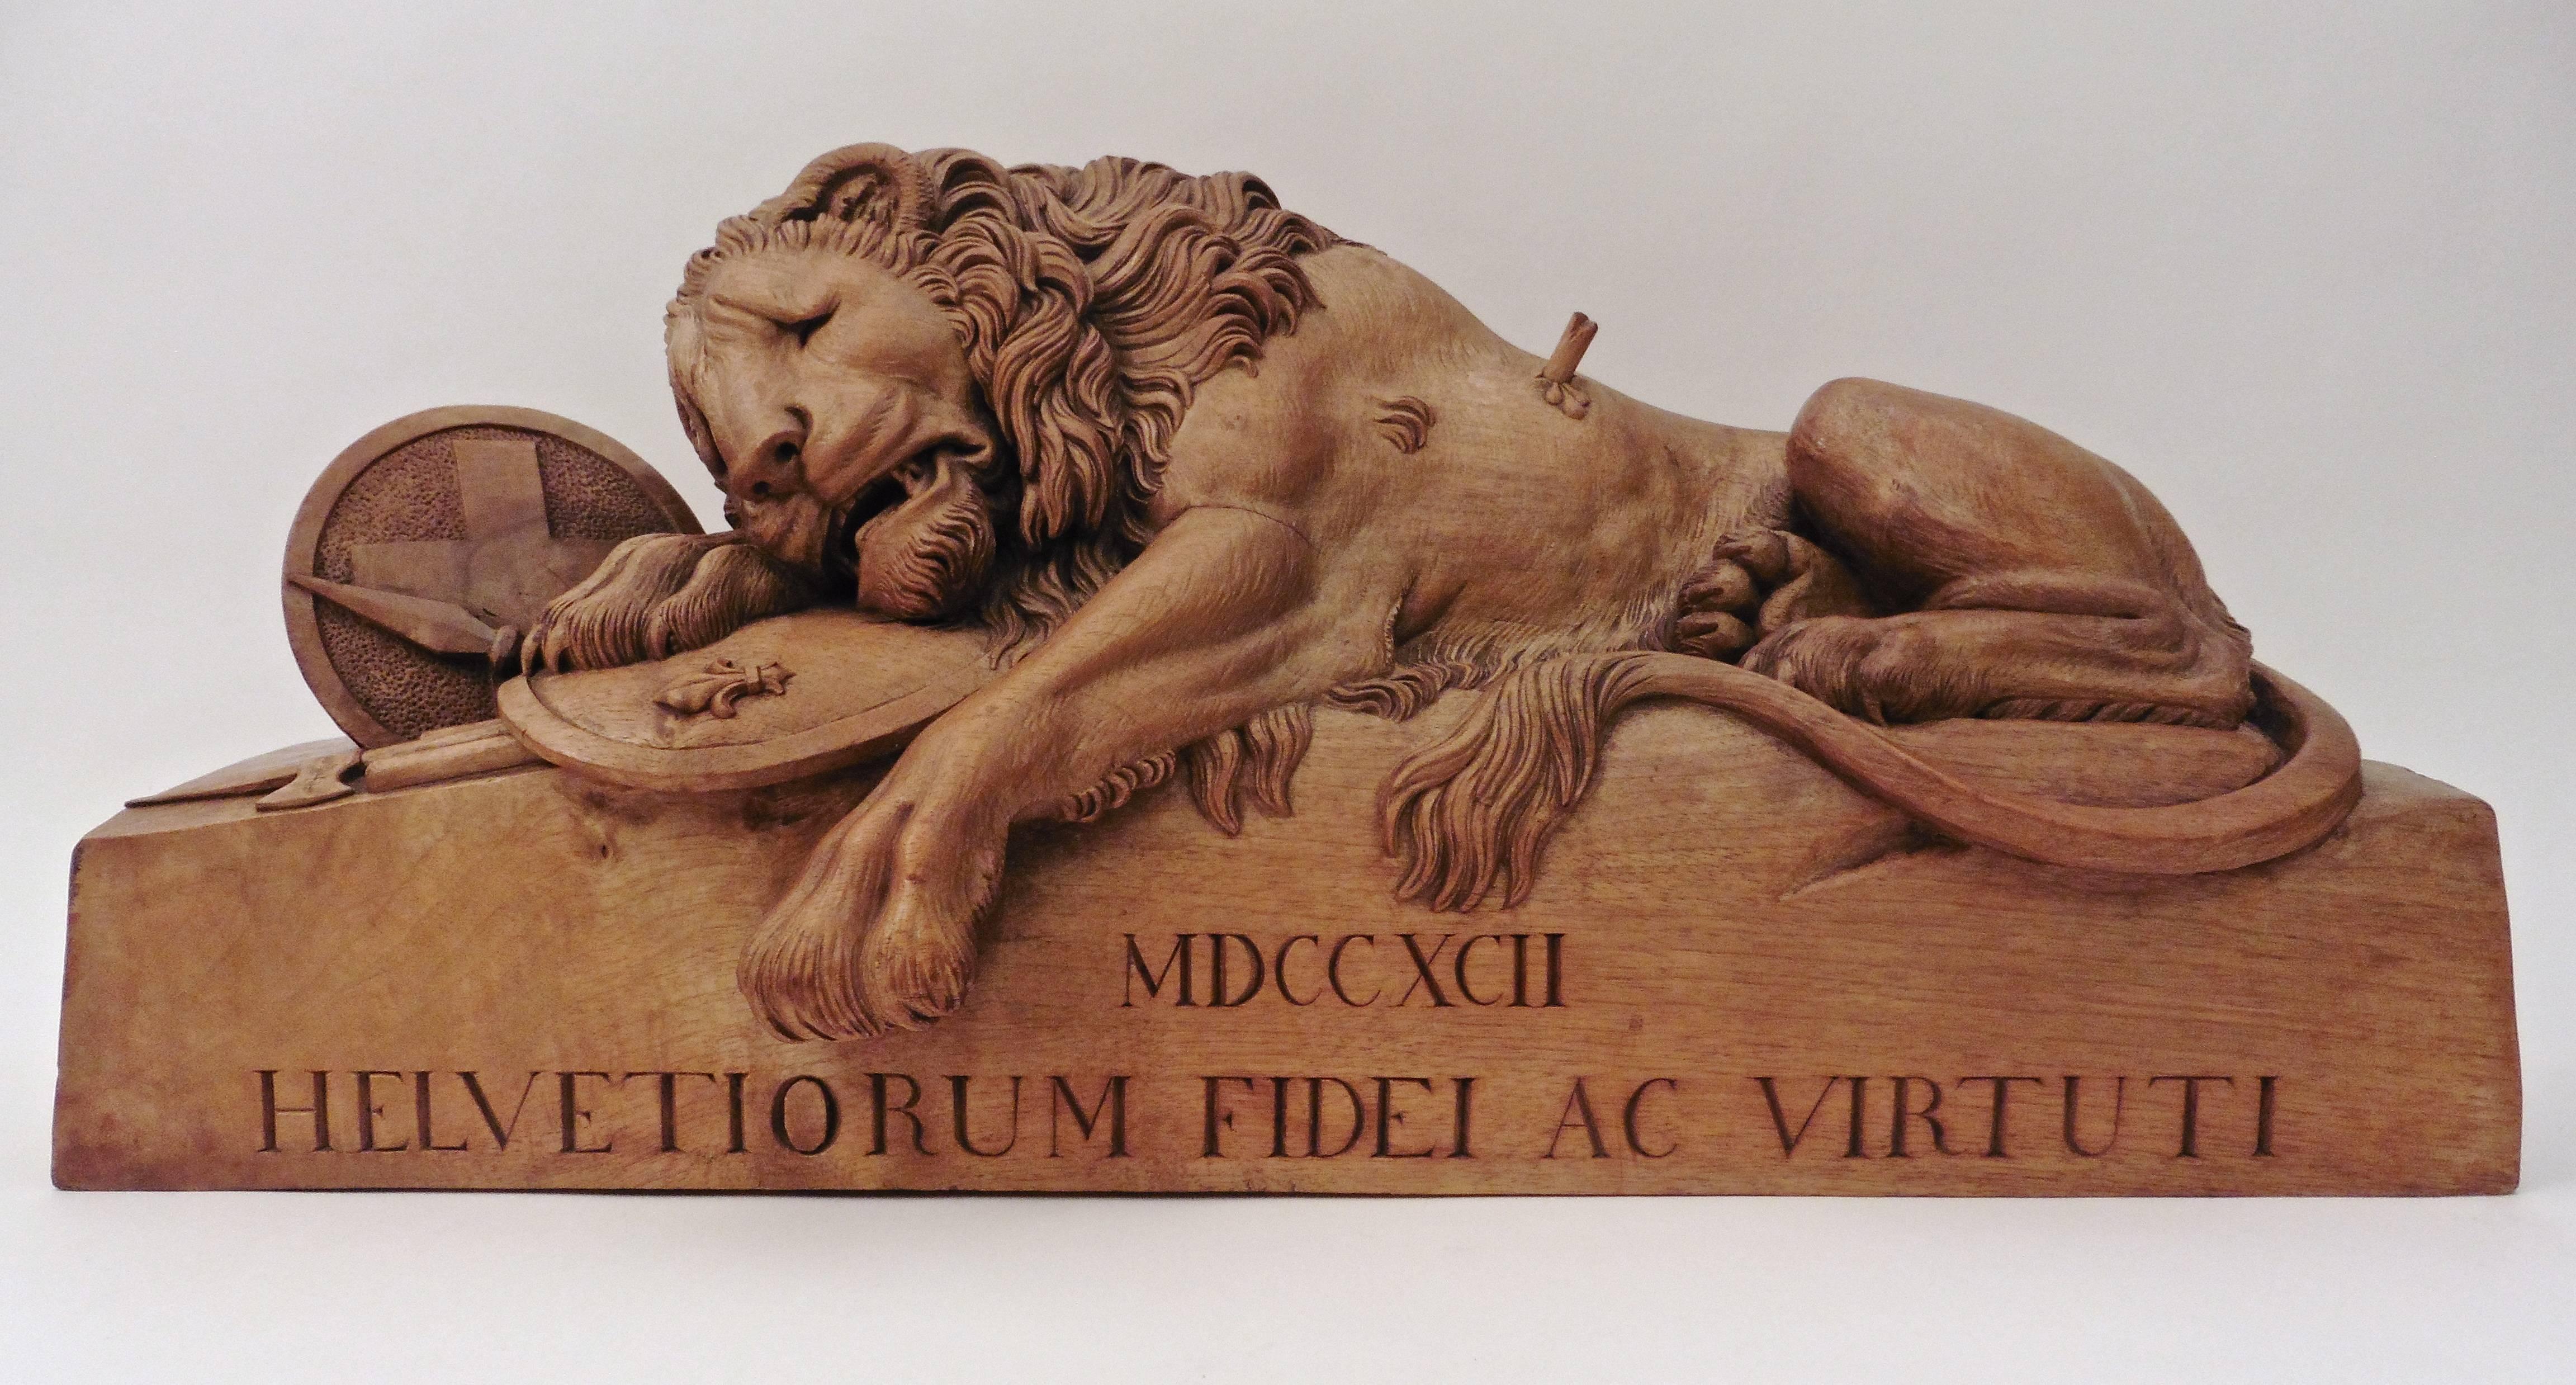 Large Swiss or Italian carved fruitwood model of “The Lion of Lucerne,” circa 1880. Along with Roman Numerals denoting the date (1792), also inscribed is 'Helvetiorum Fidei Ac Virtuti' which translates as 'To the Loyalty and Bravery of the Swiss.'